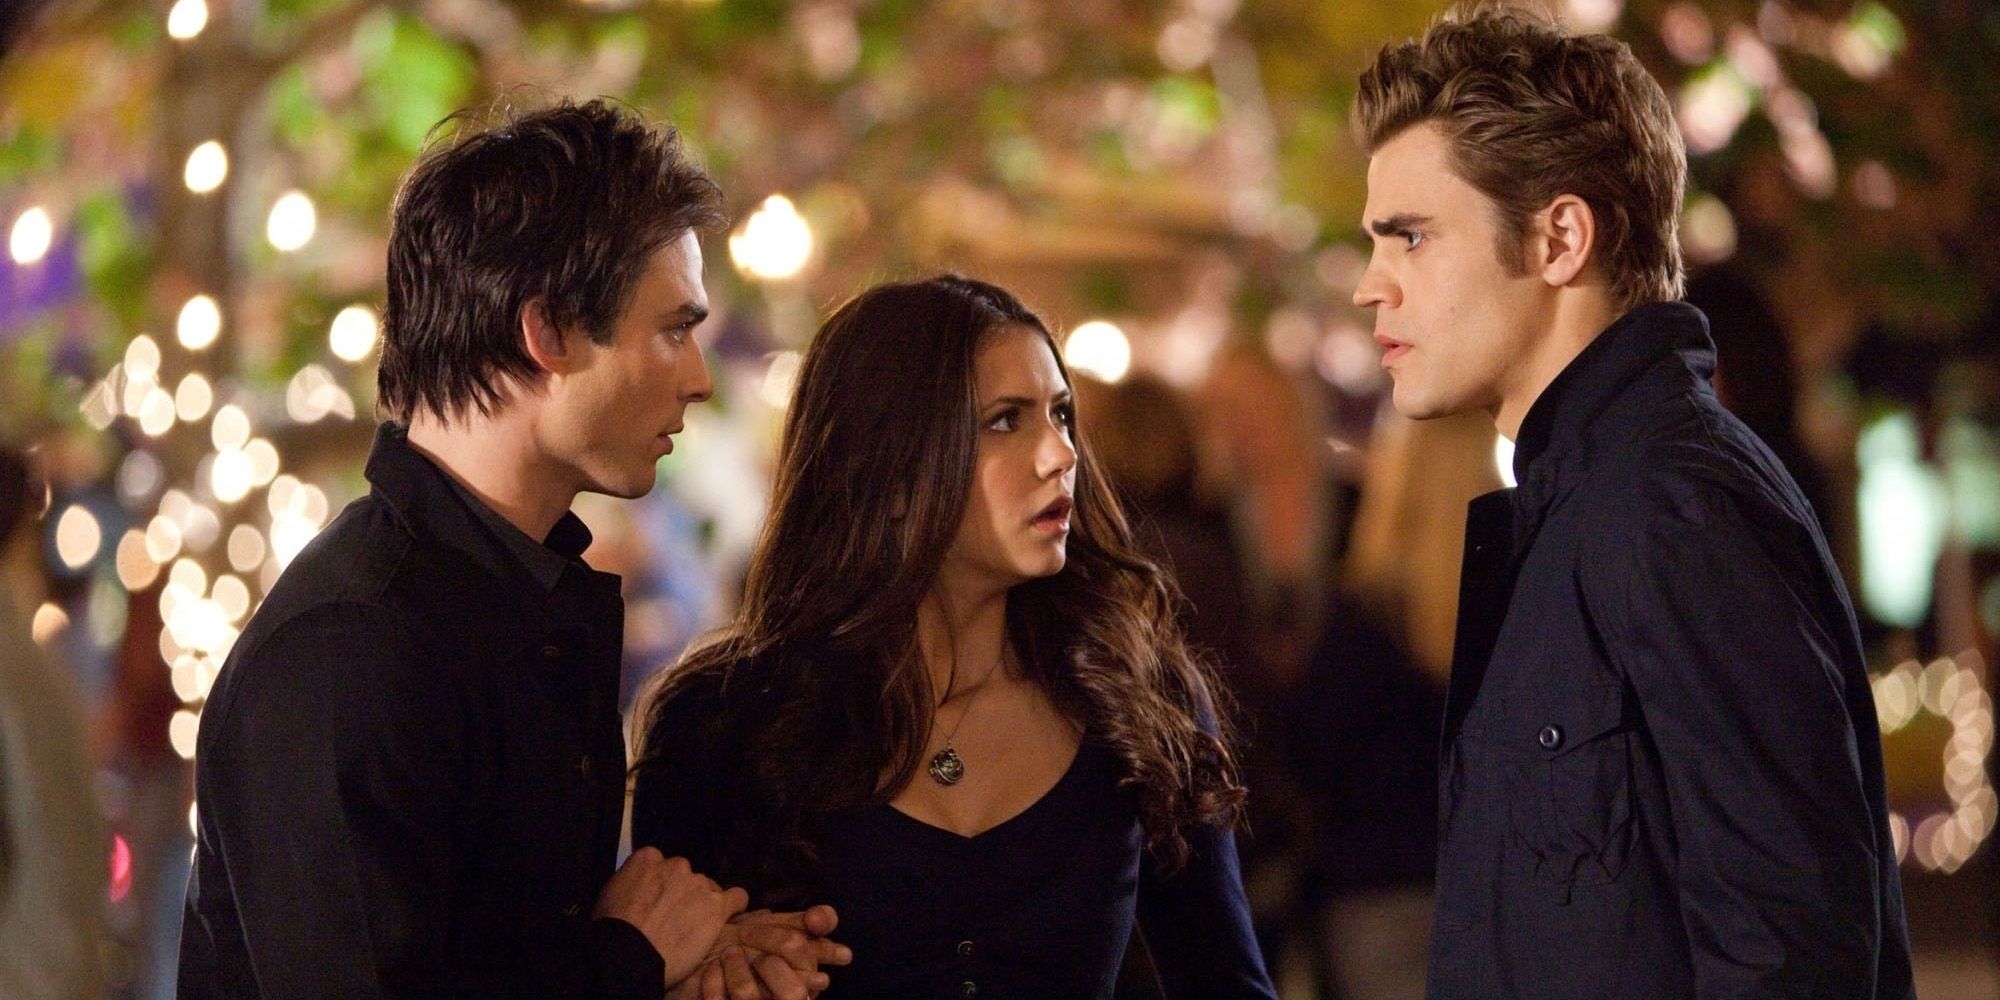 The Vampire Diaries 10 Book To Show Differences Nobody Talks About